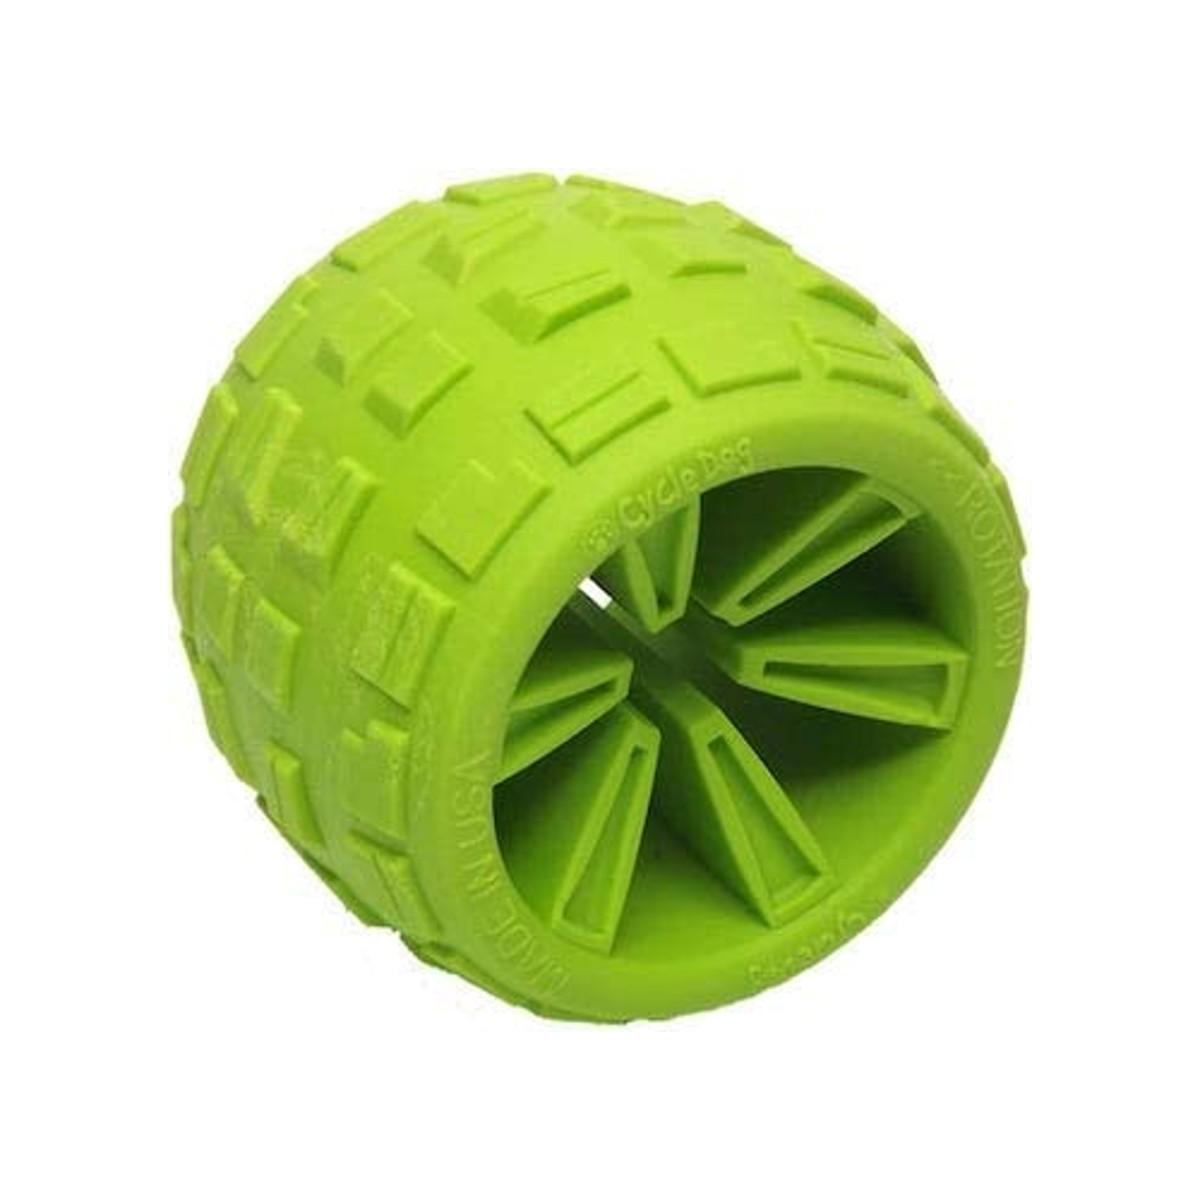 Cycle Dog High Roller Plus Ball Dog Toy - Green